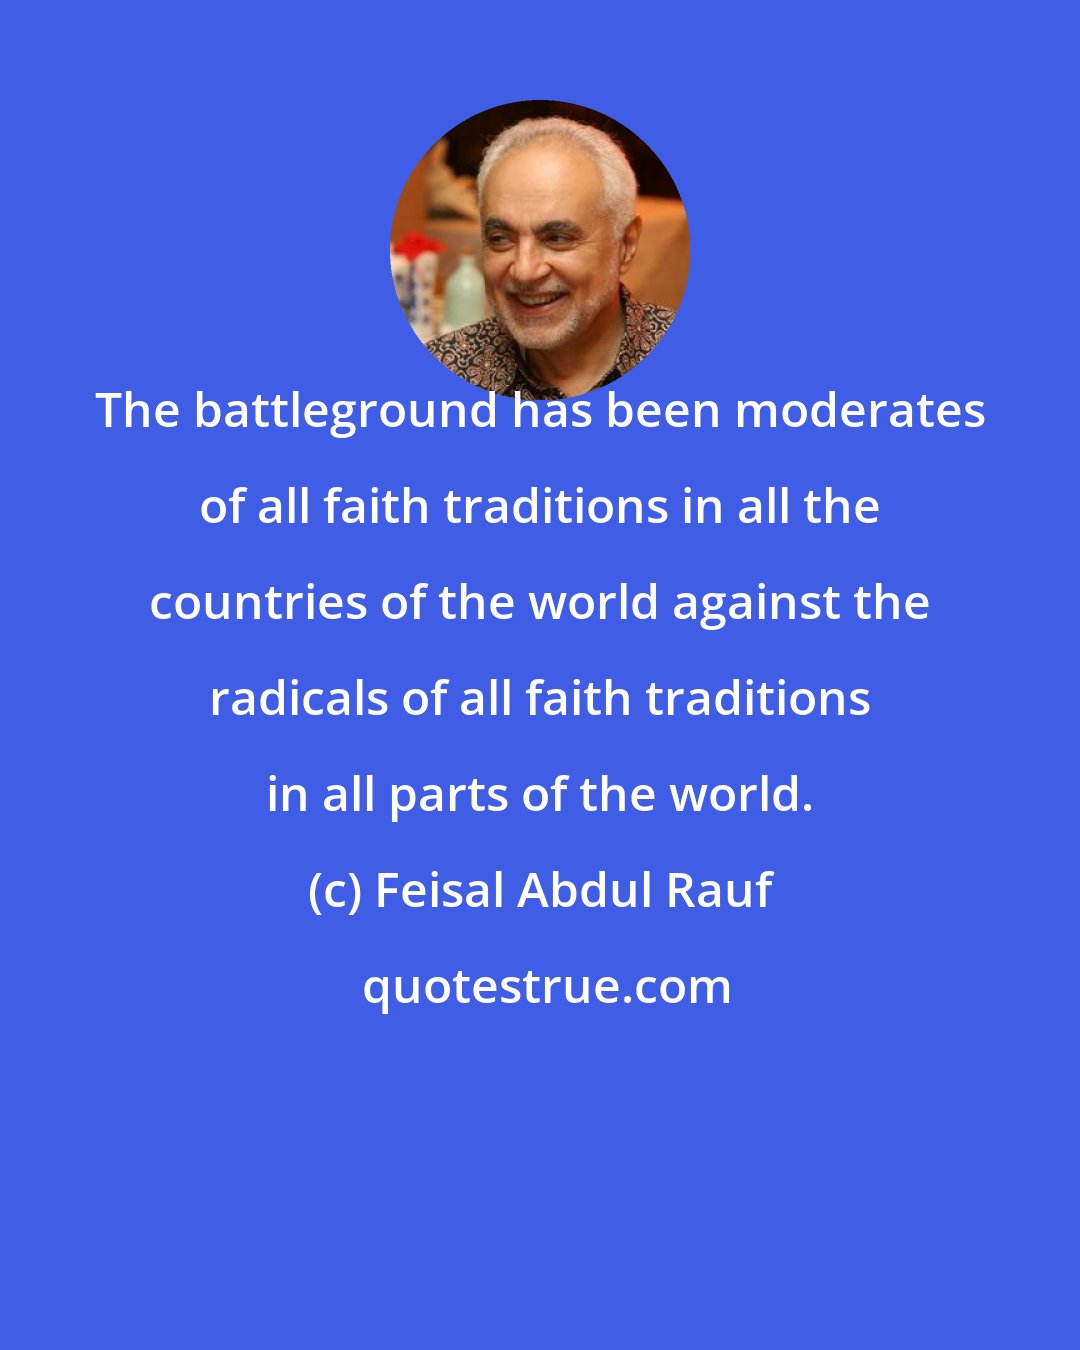 Feisal Abdul Rauf: The battleground has been moderates of all faith traditions in all the countries of the world against the radicals of all faith traditions in all parts of the world.